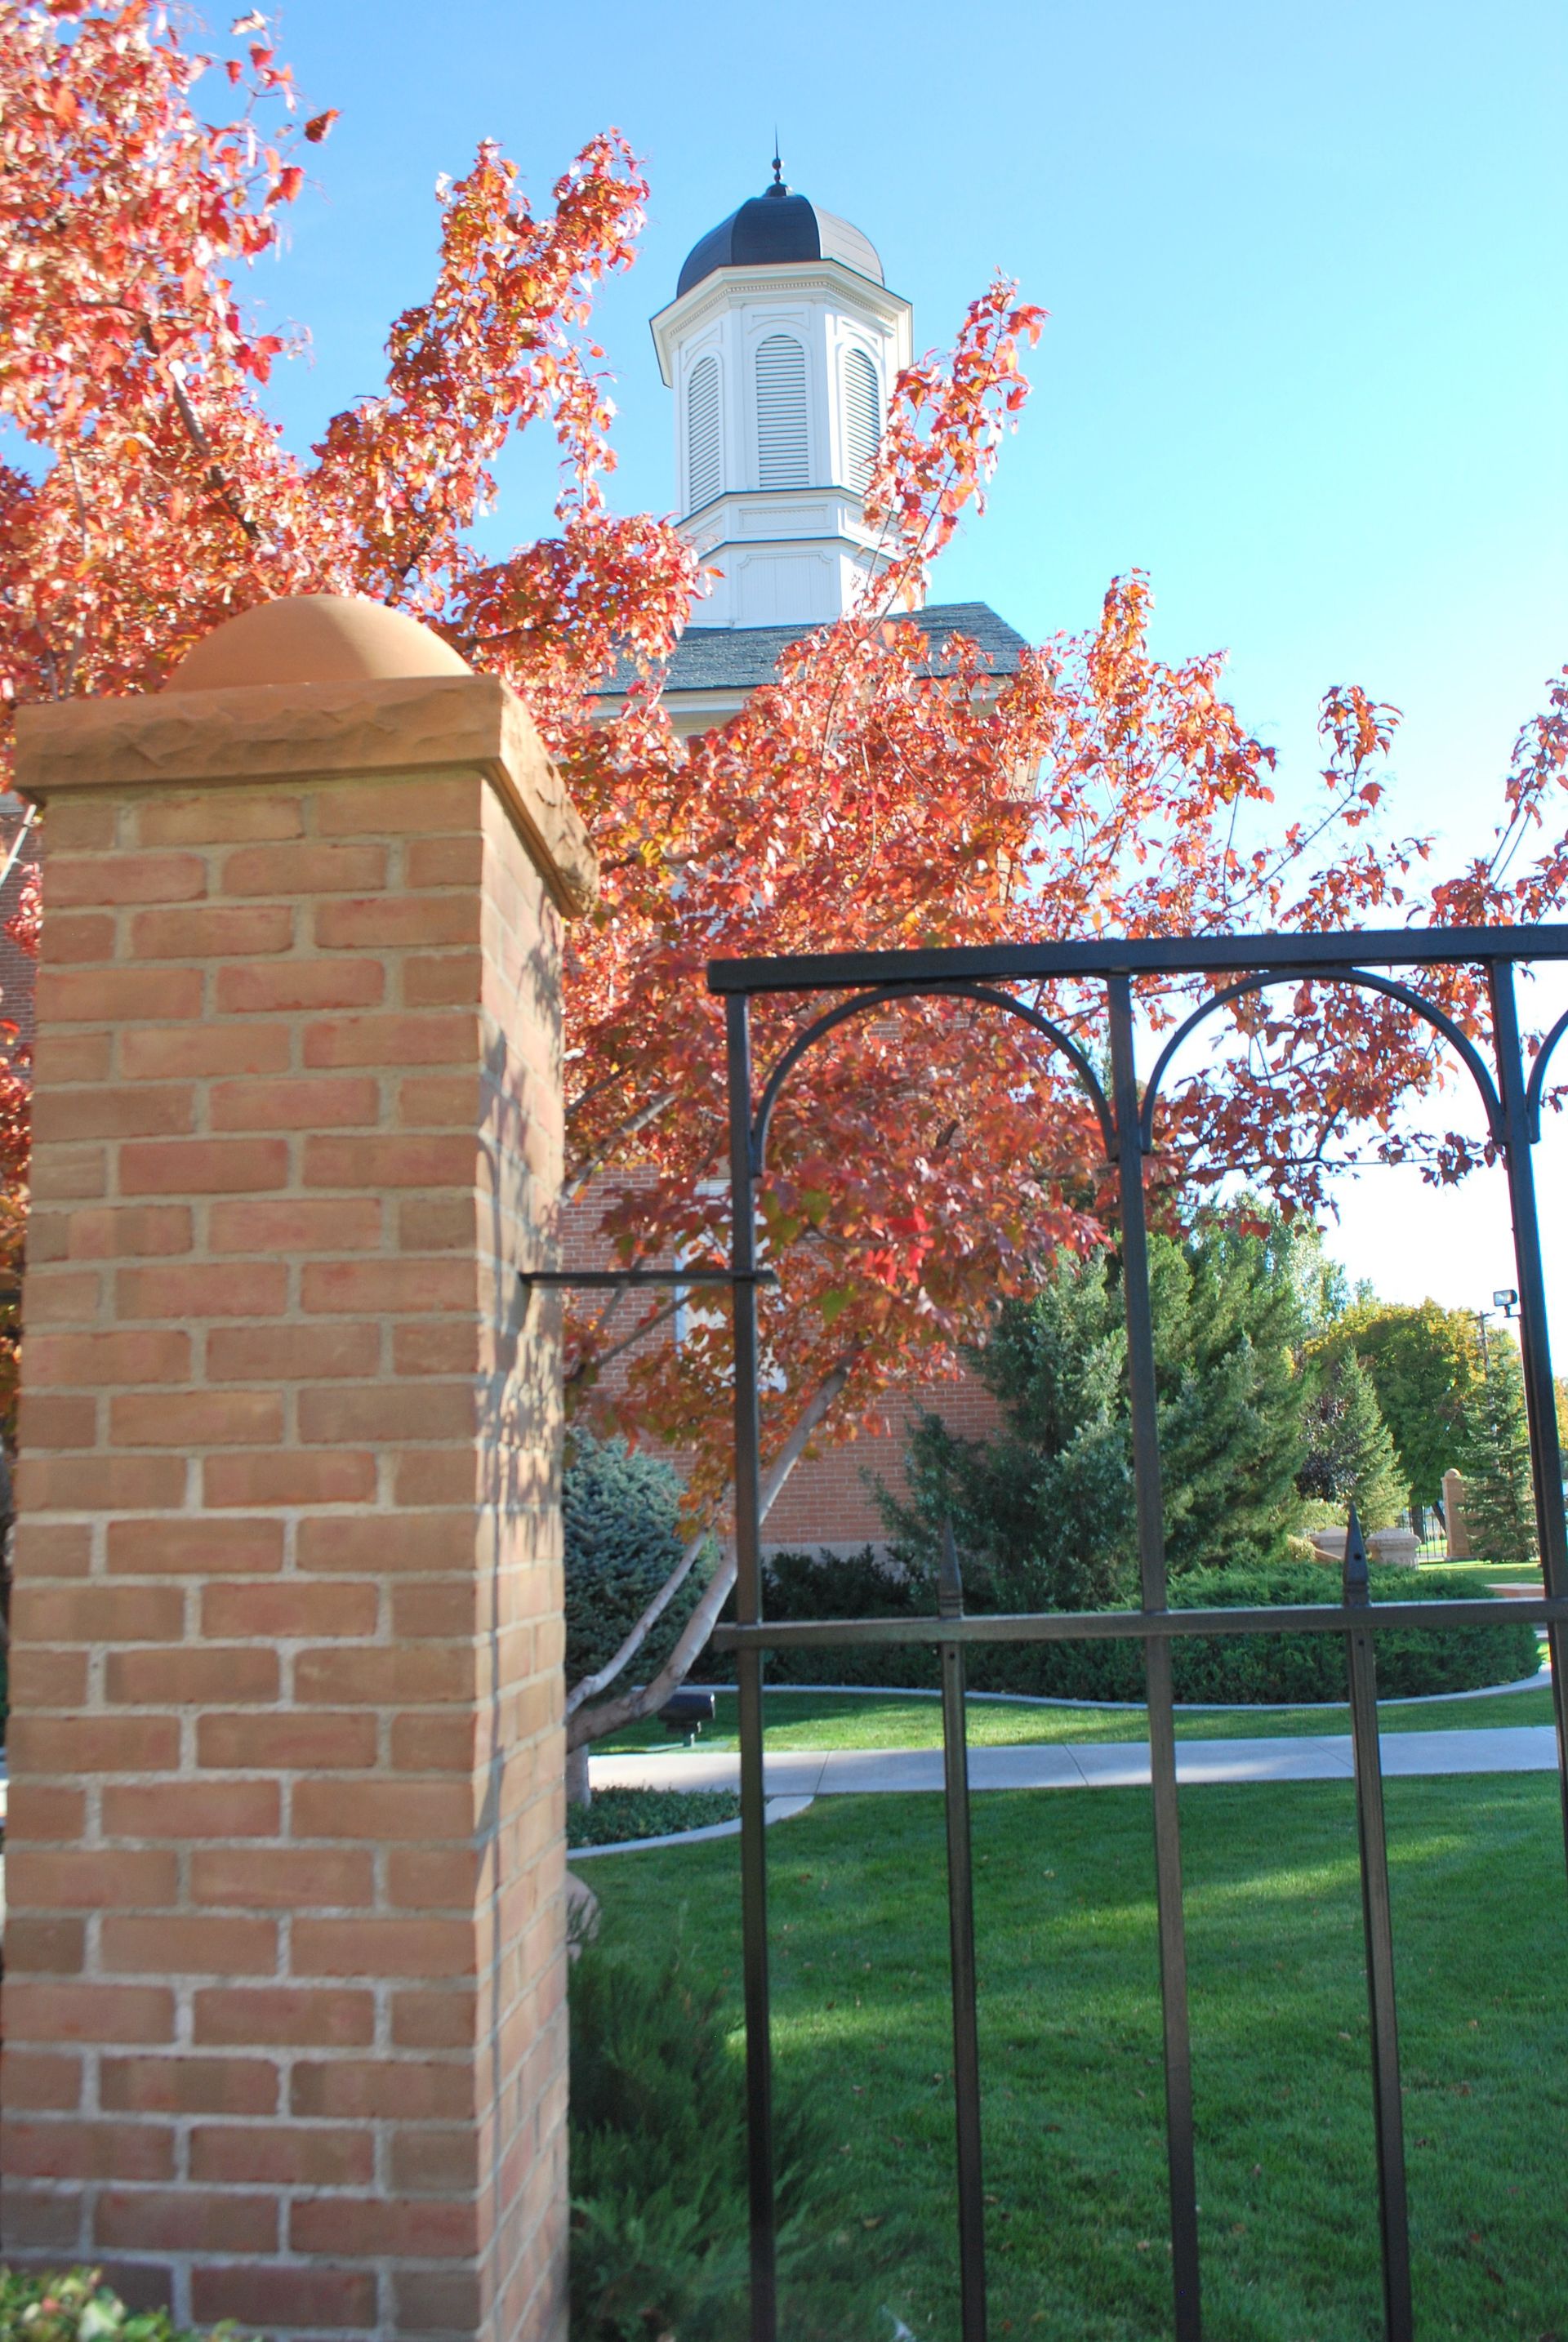 The Vernal Utah Temple gate, with the spire and scenery.